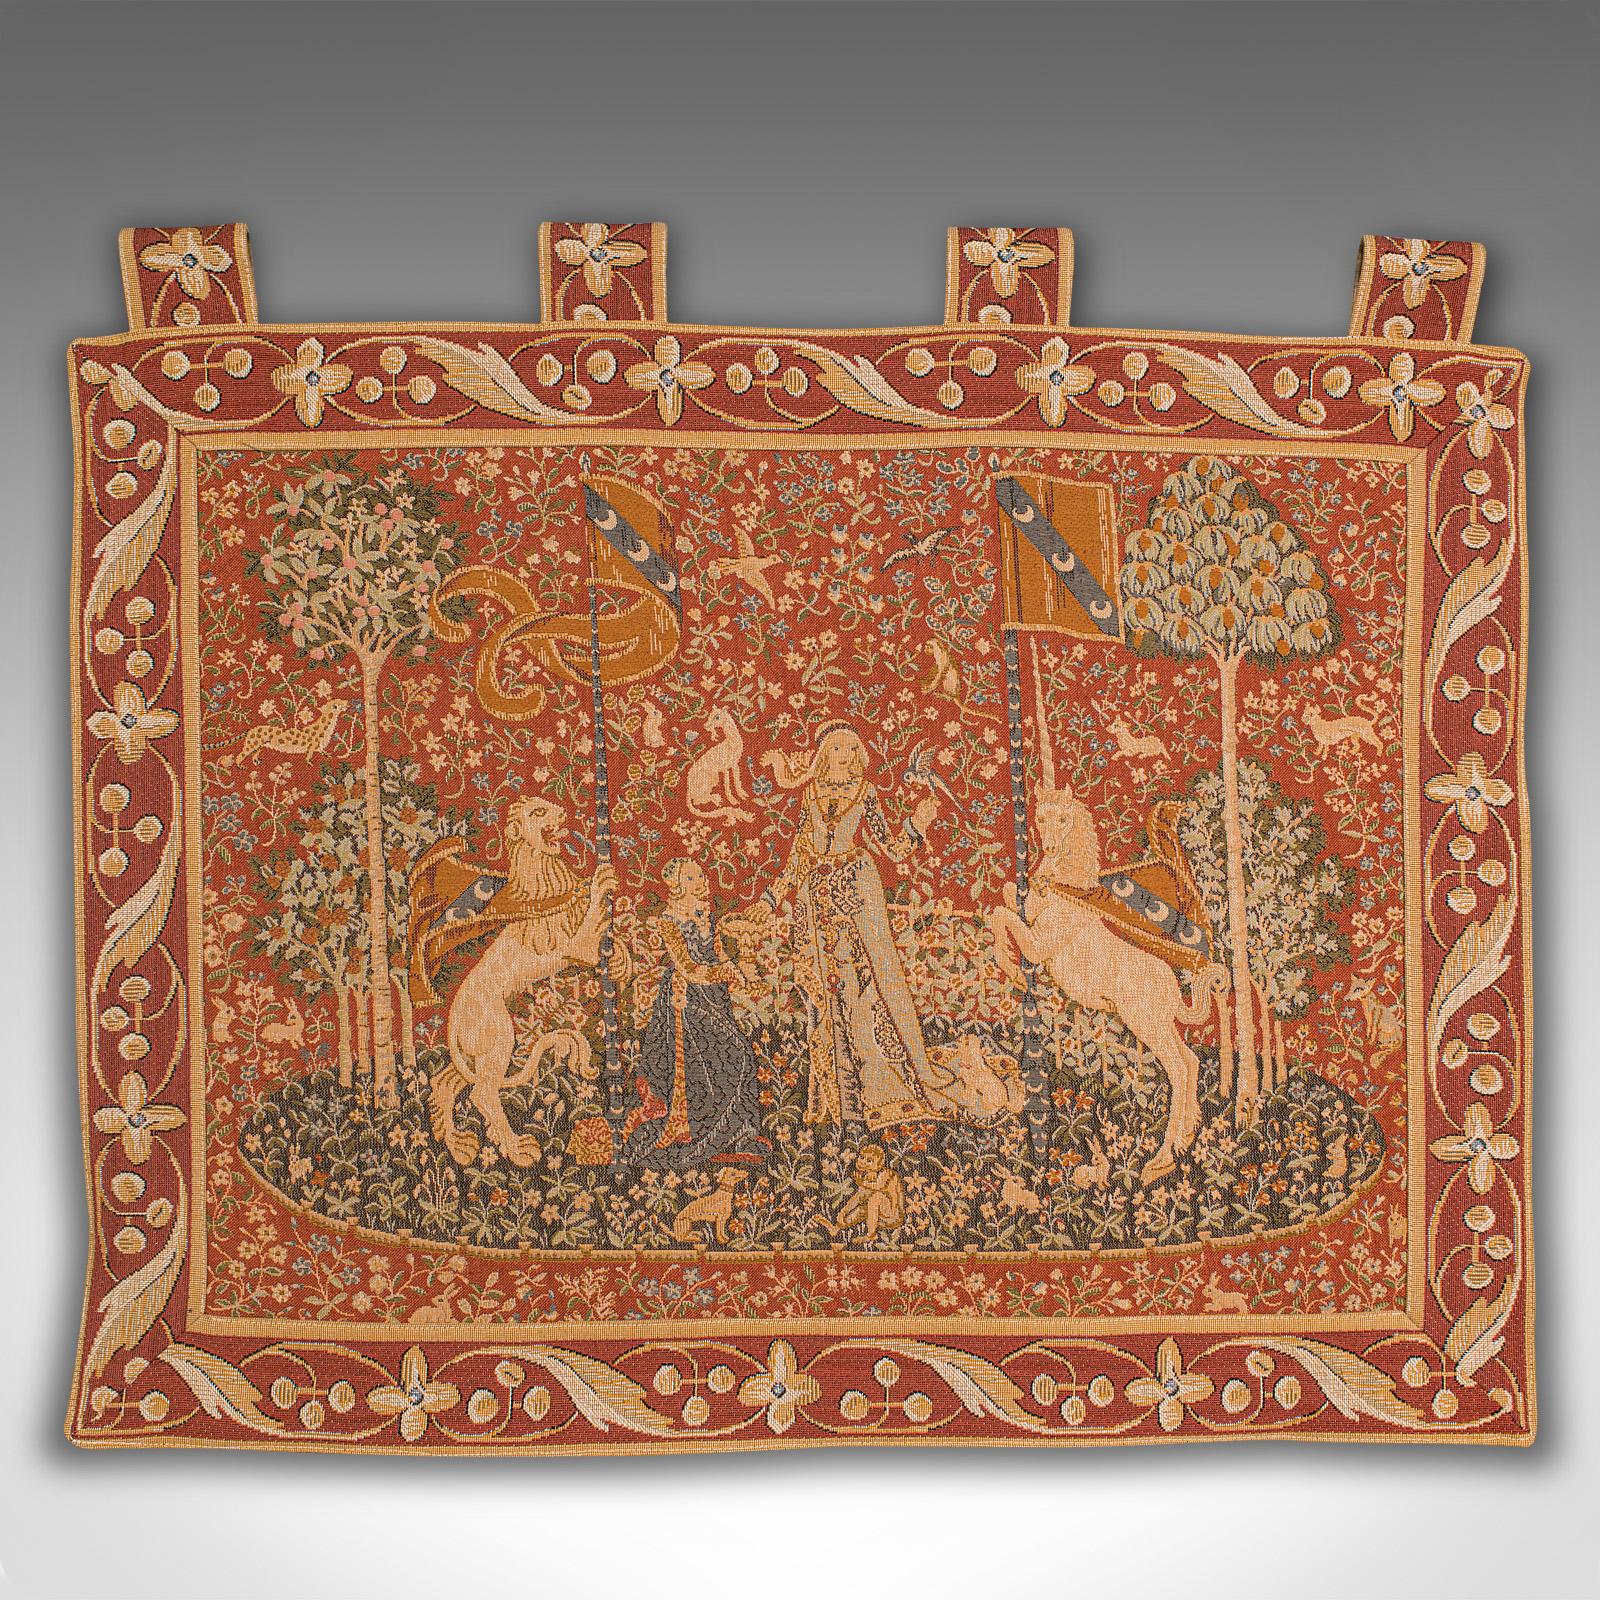 This is a vintage wall tapestry. An English, needlepoint scene depicting The Lady and the Unicorn, dating to the late 20th century, circa 1980.

This striking tapestry is a quality recreation of the 15th century renaissance series of tapestries